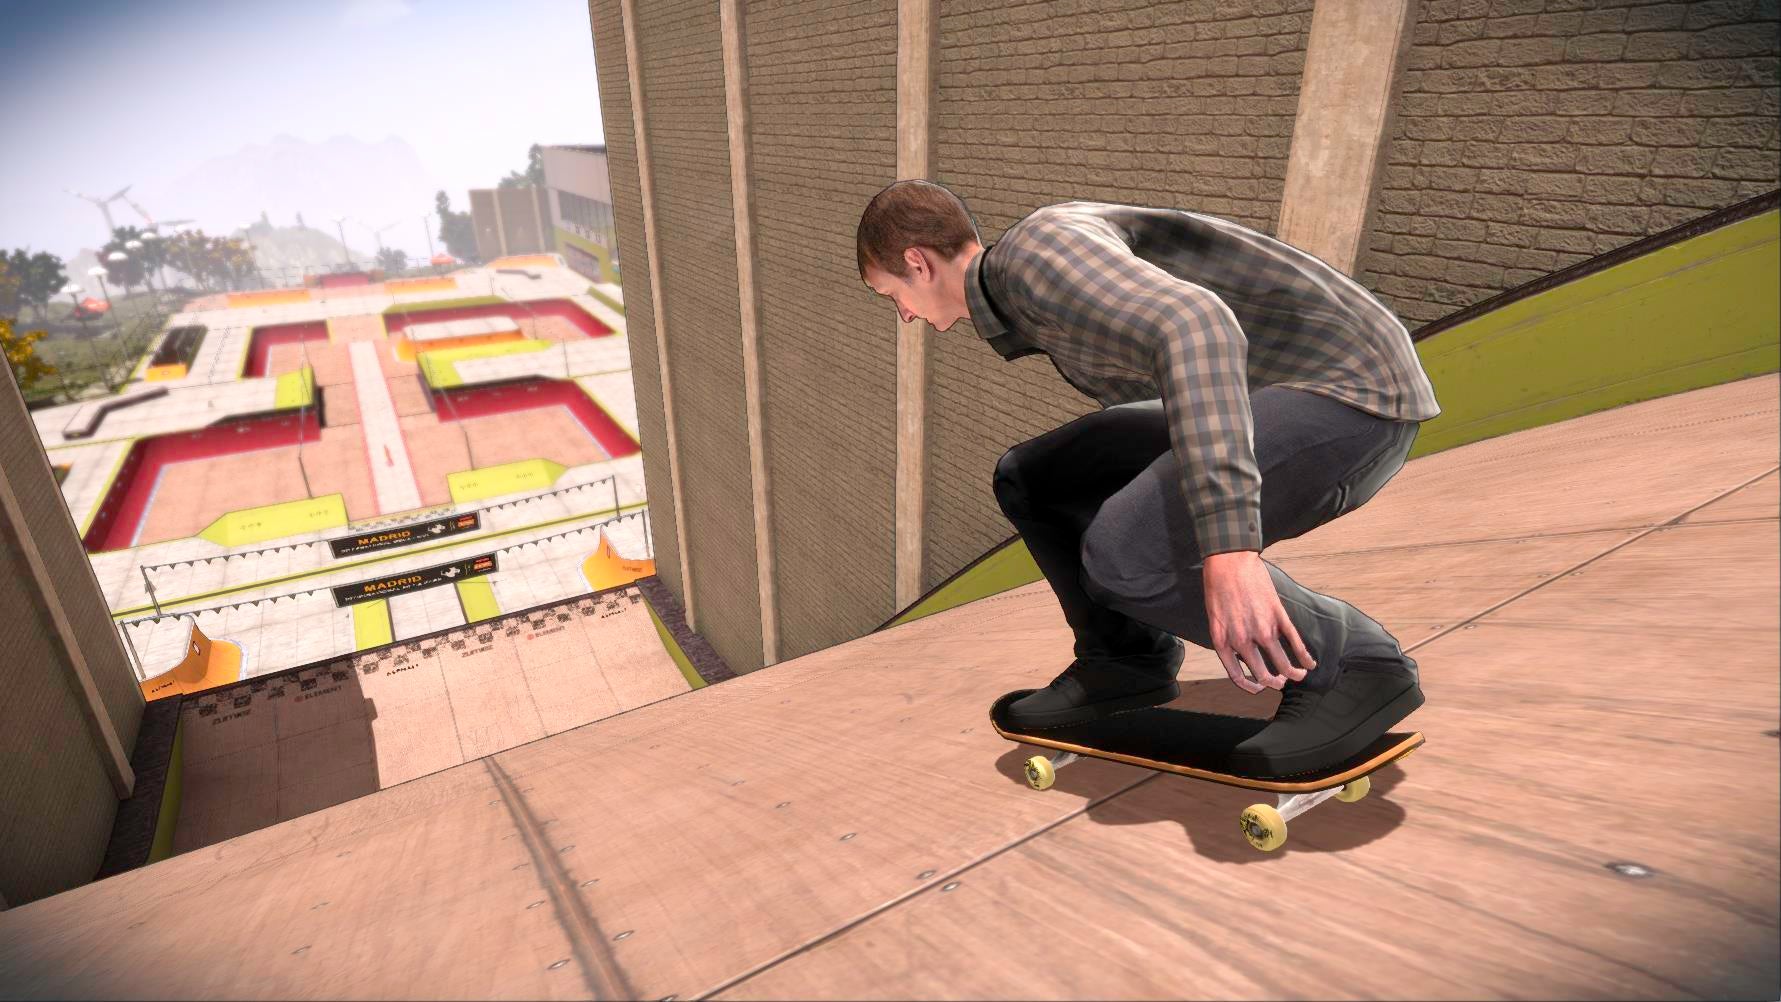 Image for Tony Hawk's Pro Skater 5 day one patch is larger than game's actual size